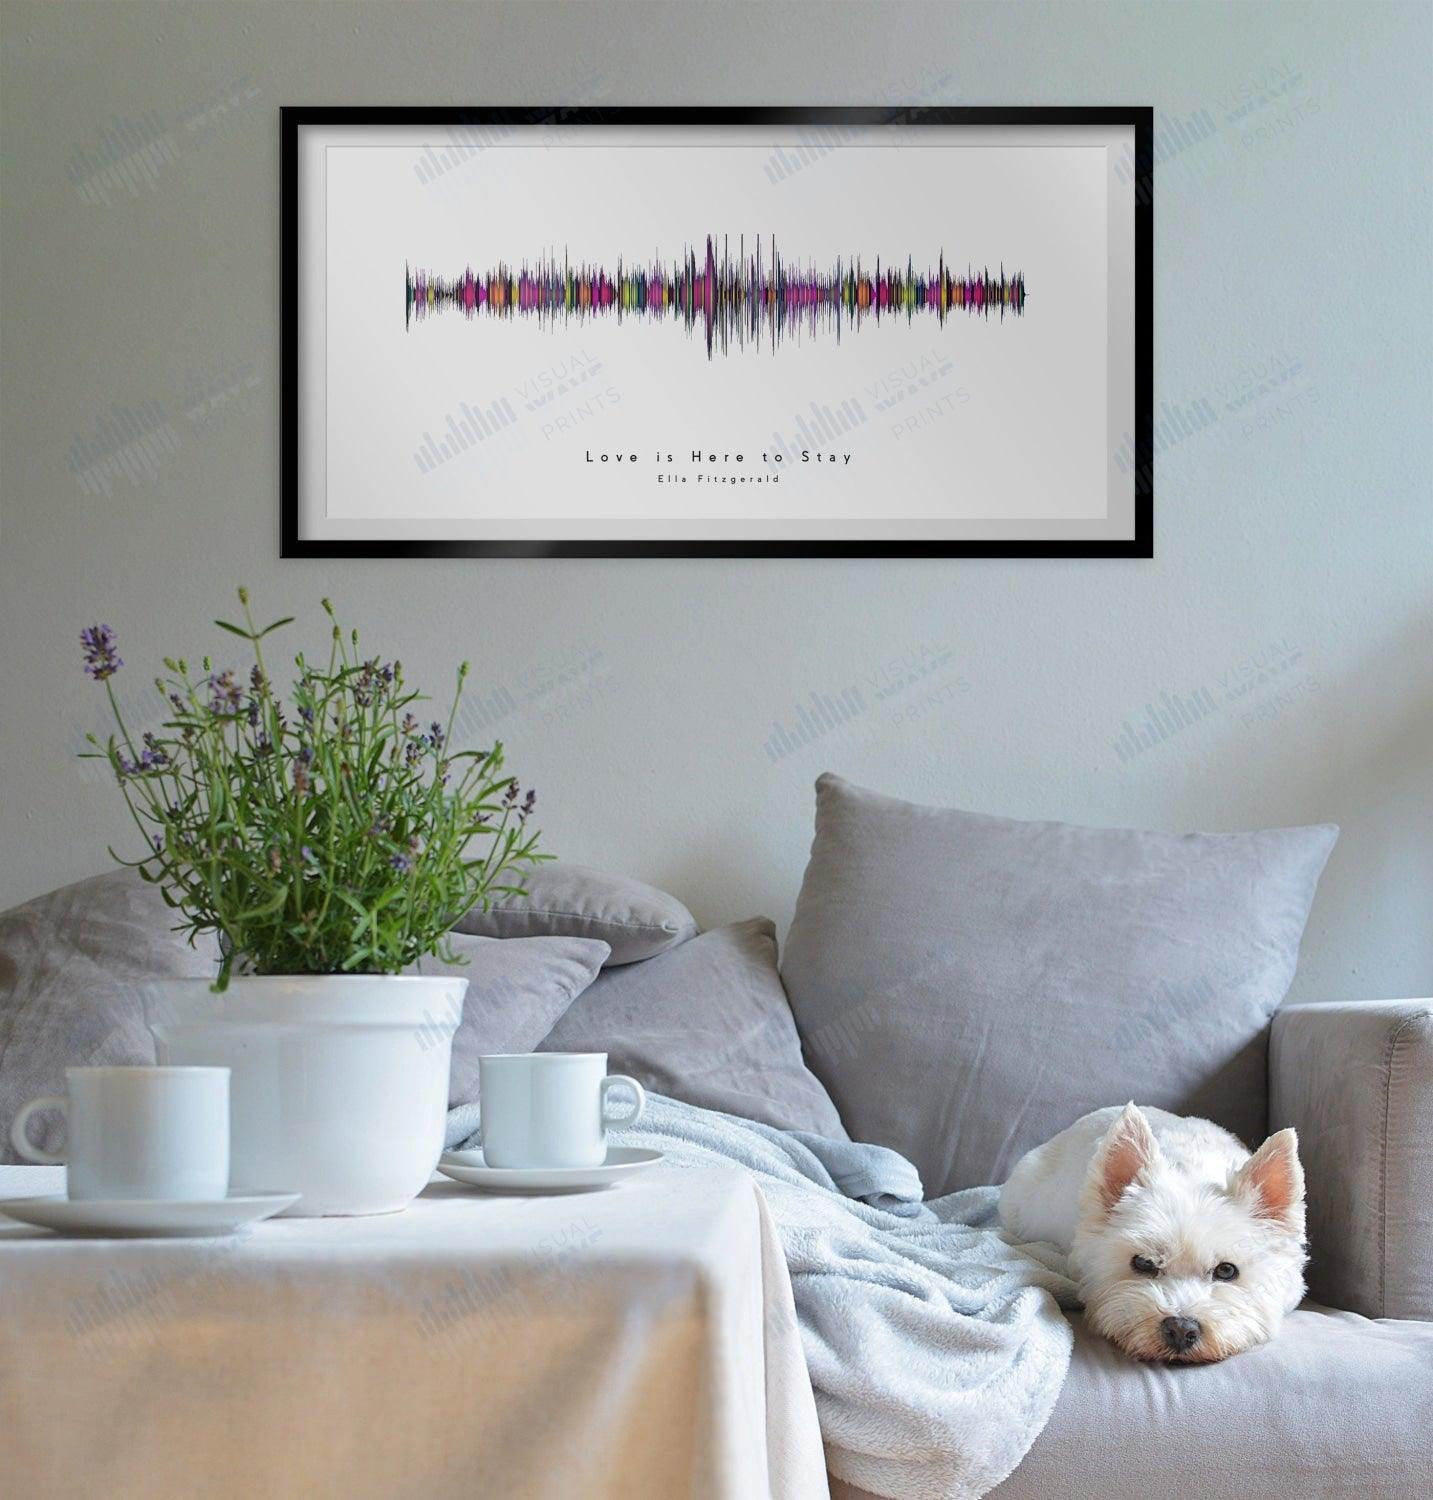 Love Is Here to Stay by Ella Fitzgerald - Visual Wave Prints